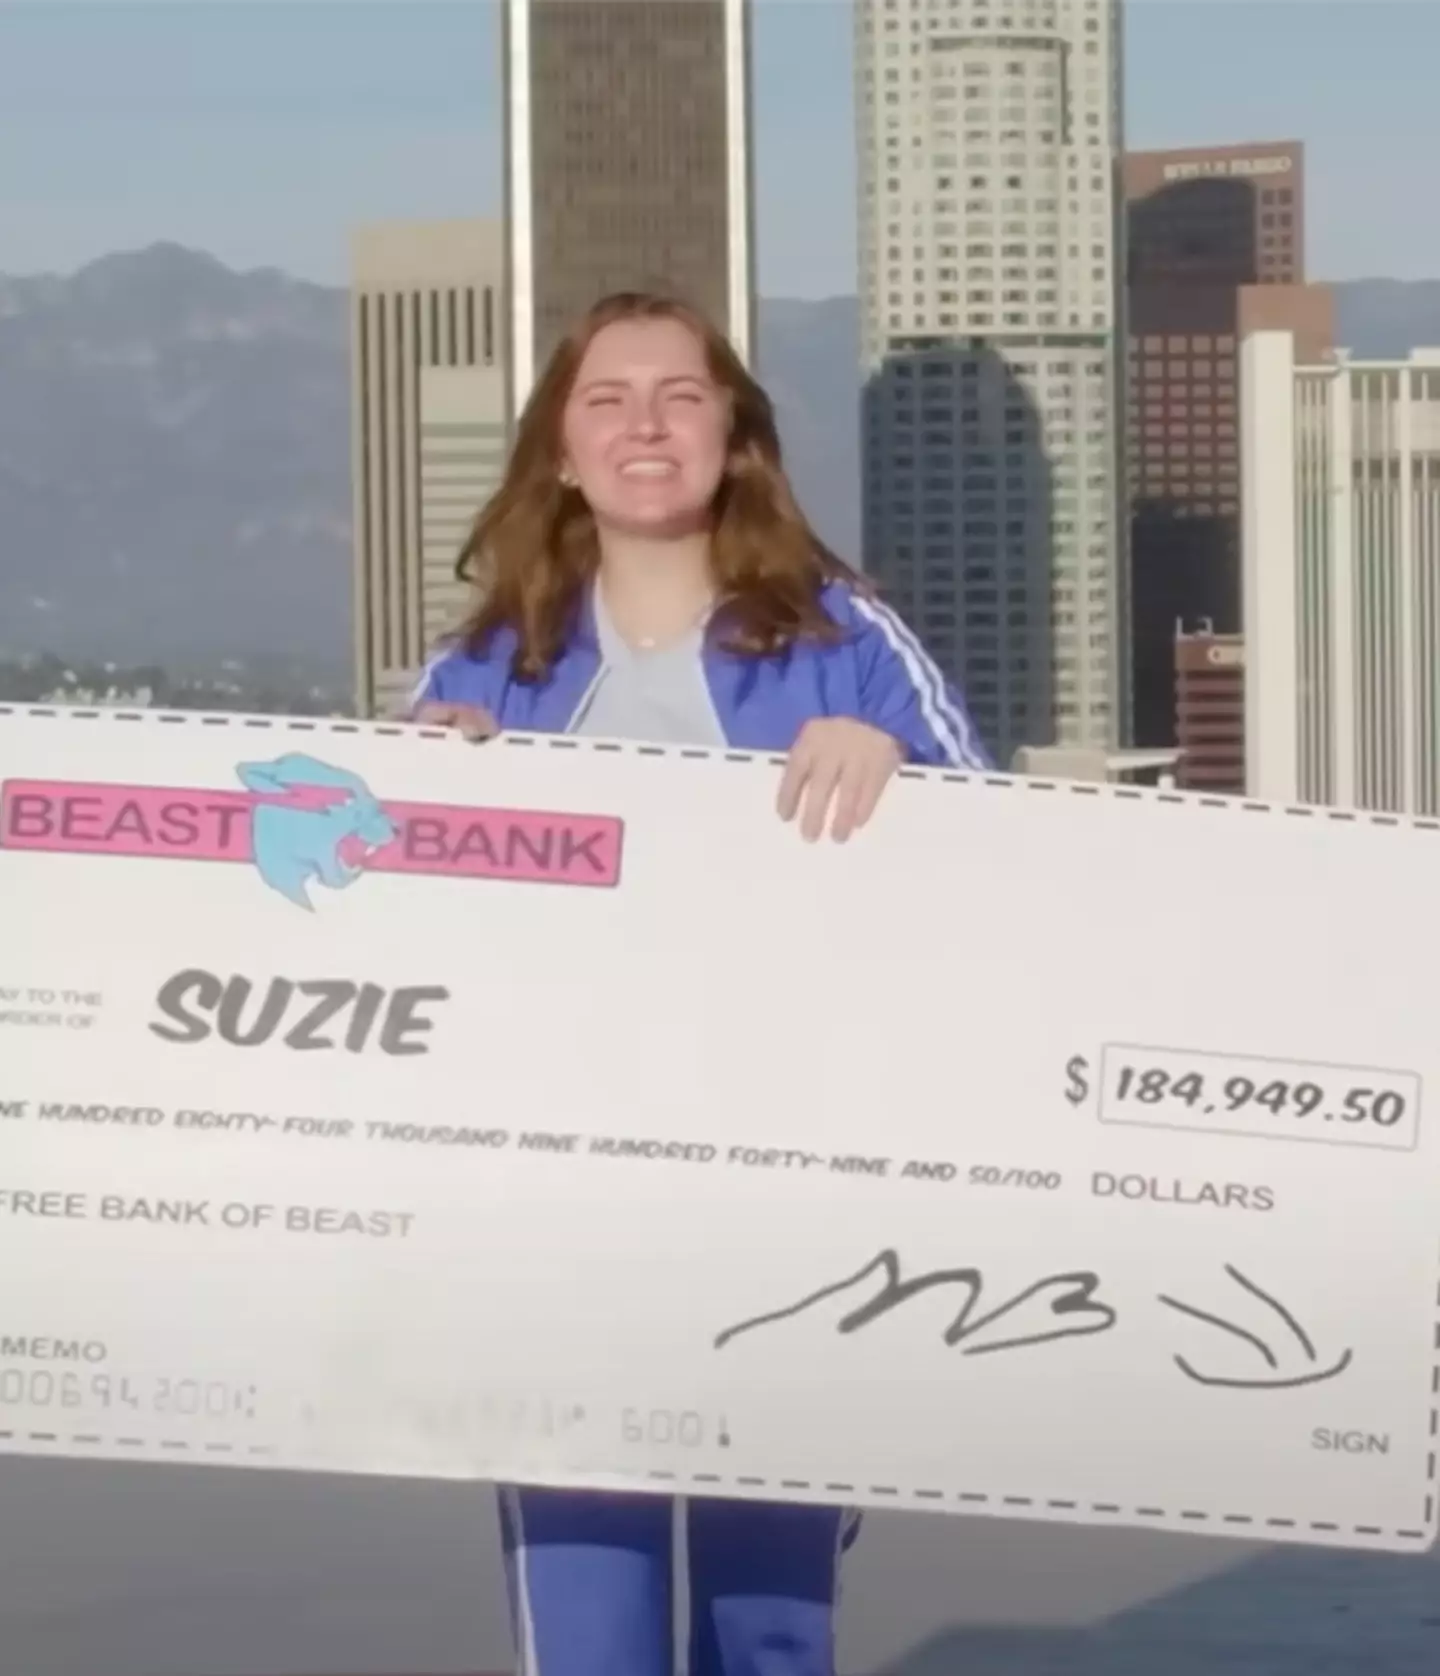 Suzie's audience have praised her for giving back to the community /  Suzie Taylor / YouTube